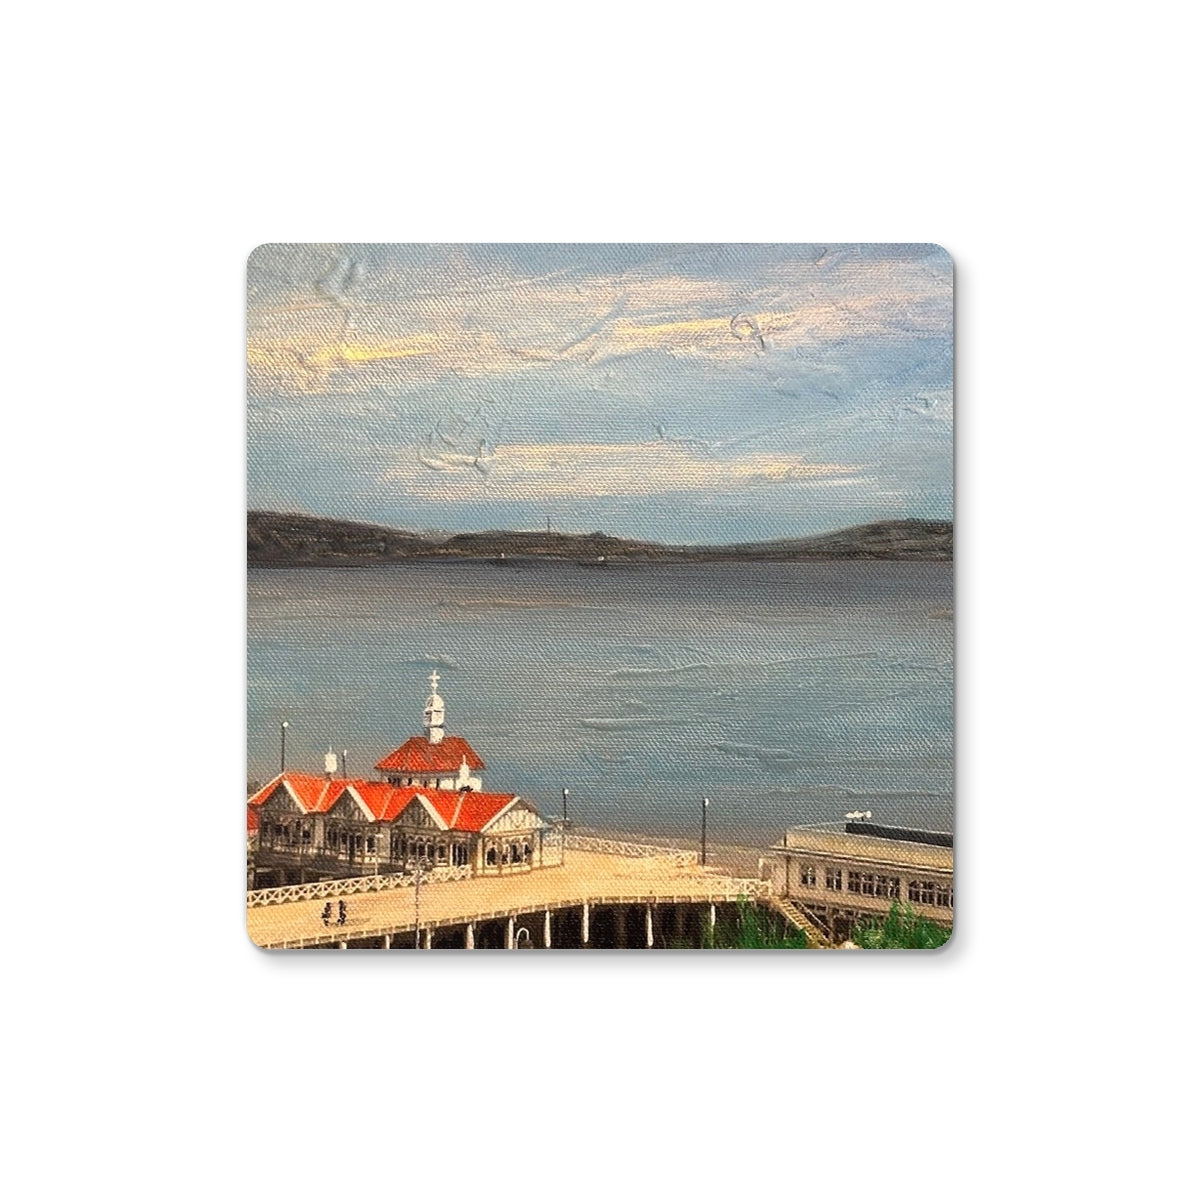 Looking From Dunoon Art Gifts Coaster-Homeware-River Clyde Art Gallery-4 Coasters-Paintings, Prints, Homeware, Art Gifts From Scotland By Scottish Artist Kevin Hunter